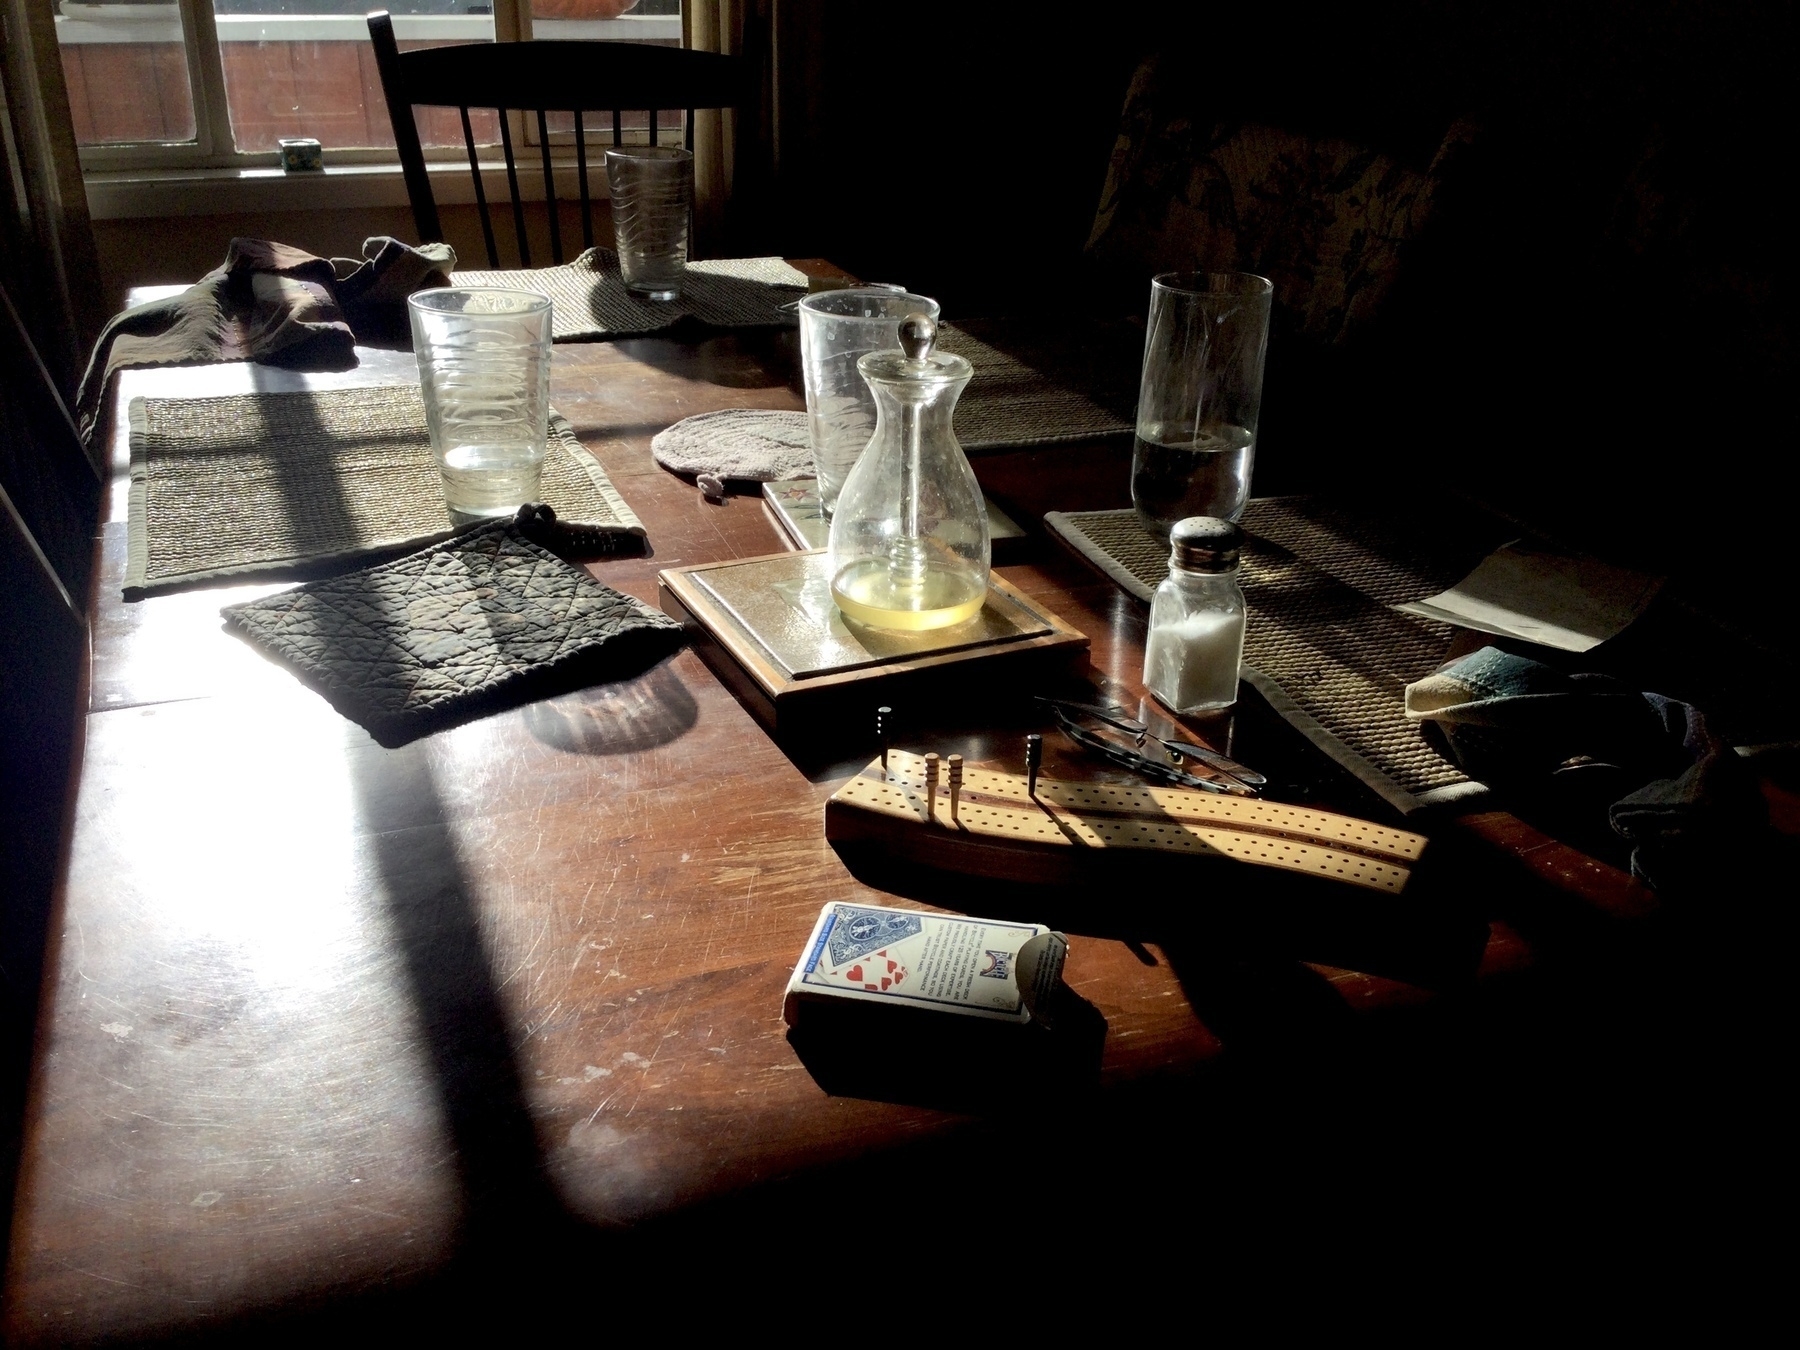 Morning light streams through onto a dining table with water glasses, place mats, napkins, salt shaker, a glass honey pot, a deck of cards, and a cribbage board. 